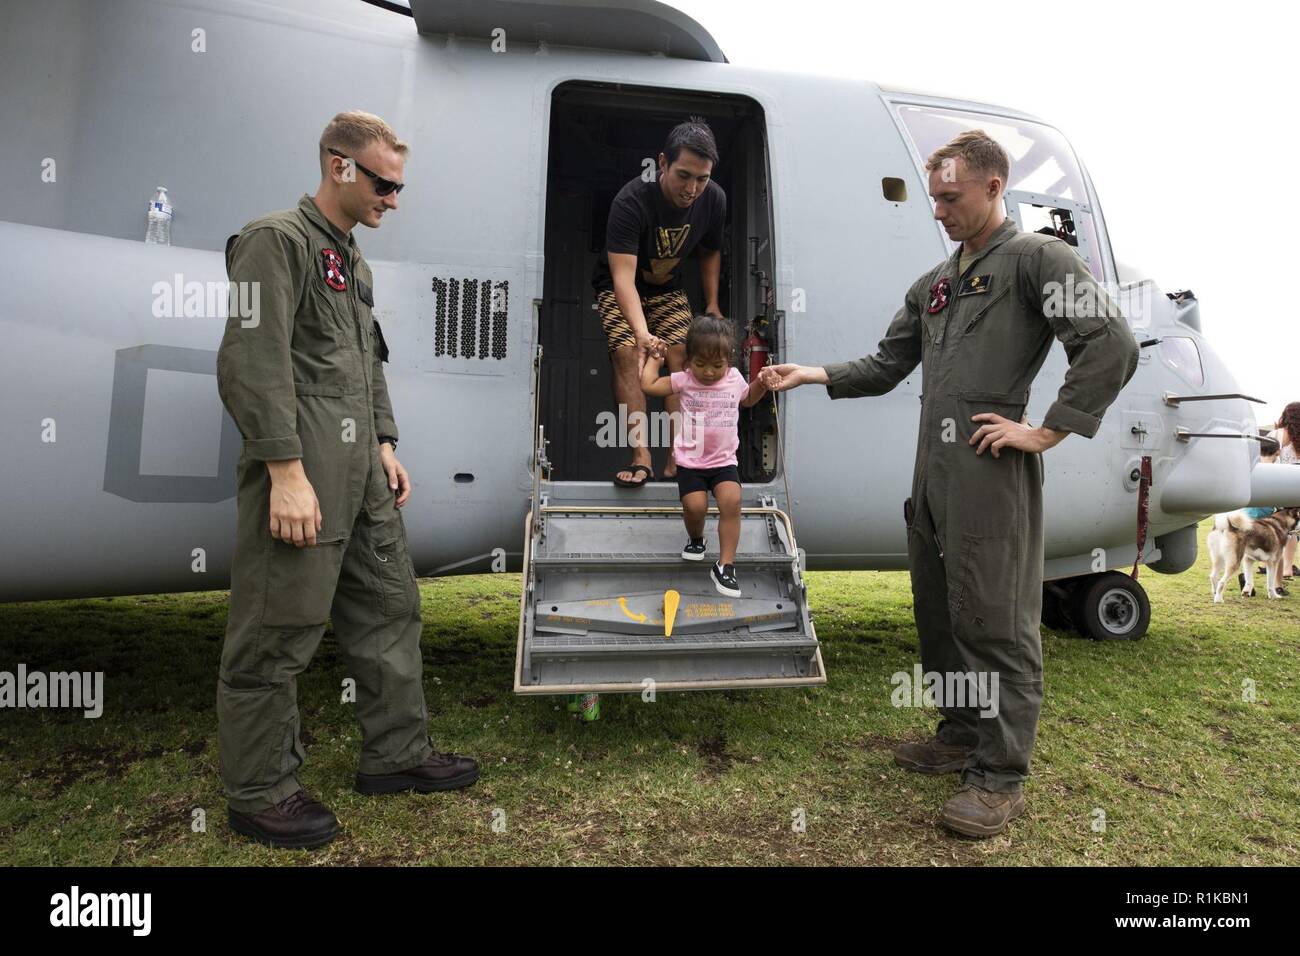 U.S. Marines with Marine Medium Tiltrotor Squadron (VMM) 363, nicknamed the Lucky Red Lions, assist a child exiting a MV-22B Osprey aircraft during the Waimea Fall Festival at the Waimea District Park, Oct. 13, 2018. VMM-363 flew one of their aircraft from Marine Corps Base Hawaii on Oahu to the Waimea Fall Festival, providing a static display and subject matter experts for a first-hand experience to the festival’s attendants. The squadron arrived to Hawaii earlier this year increasing the combat capability and crisis response within the Indo-Pacific region. Stock Photo